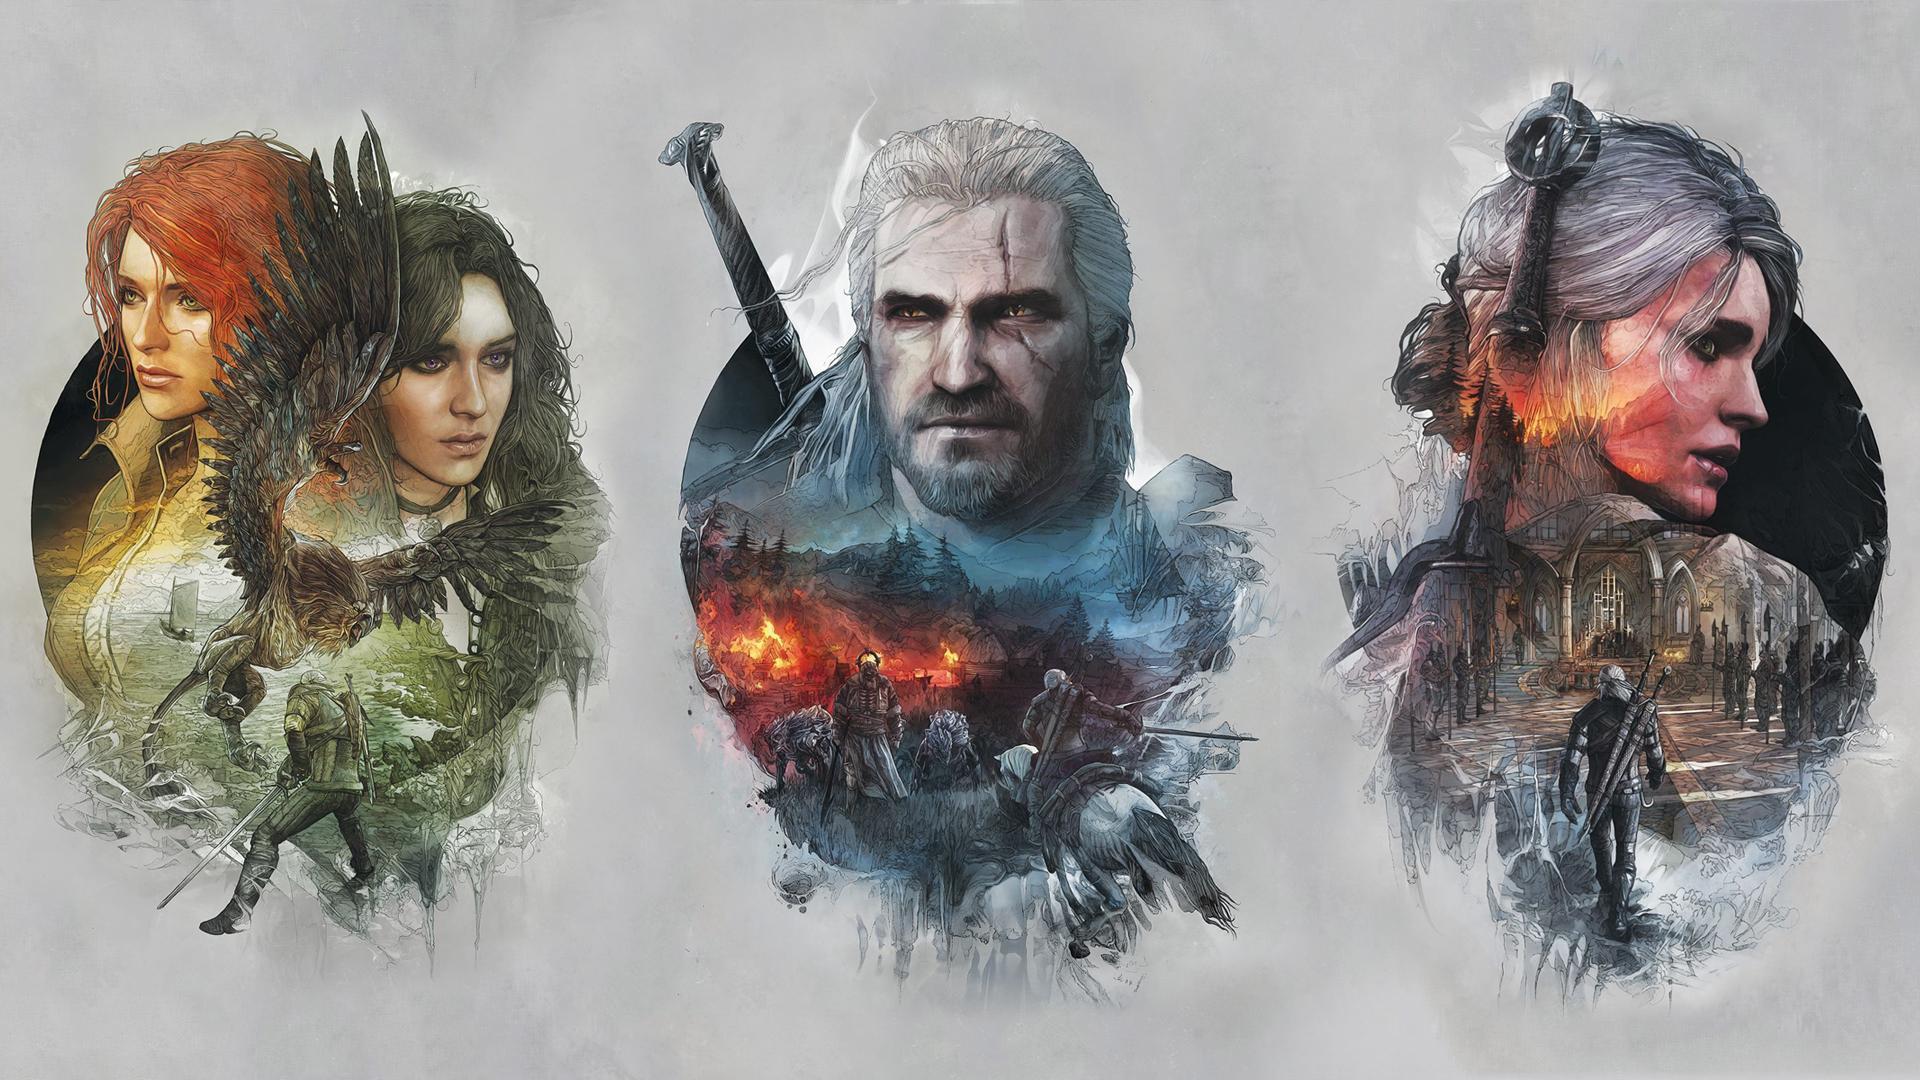 The Witcher 3 Wallpaper Image